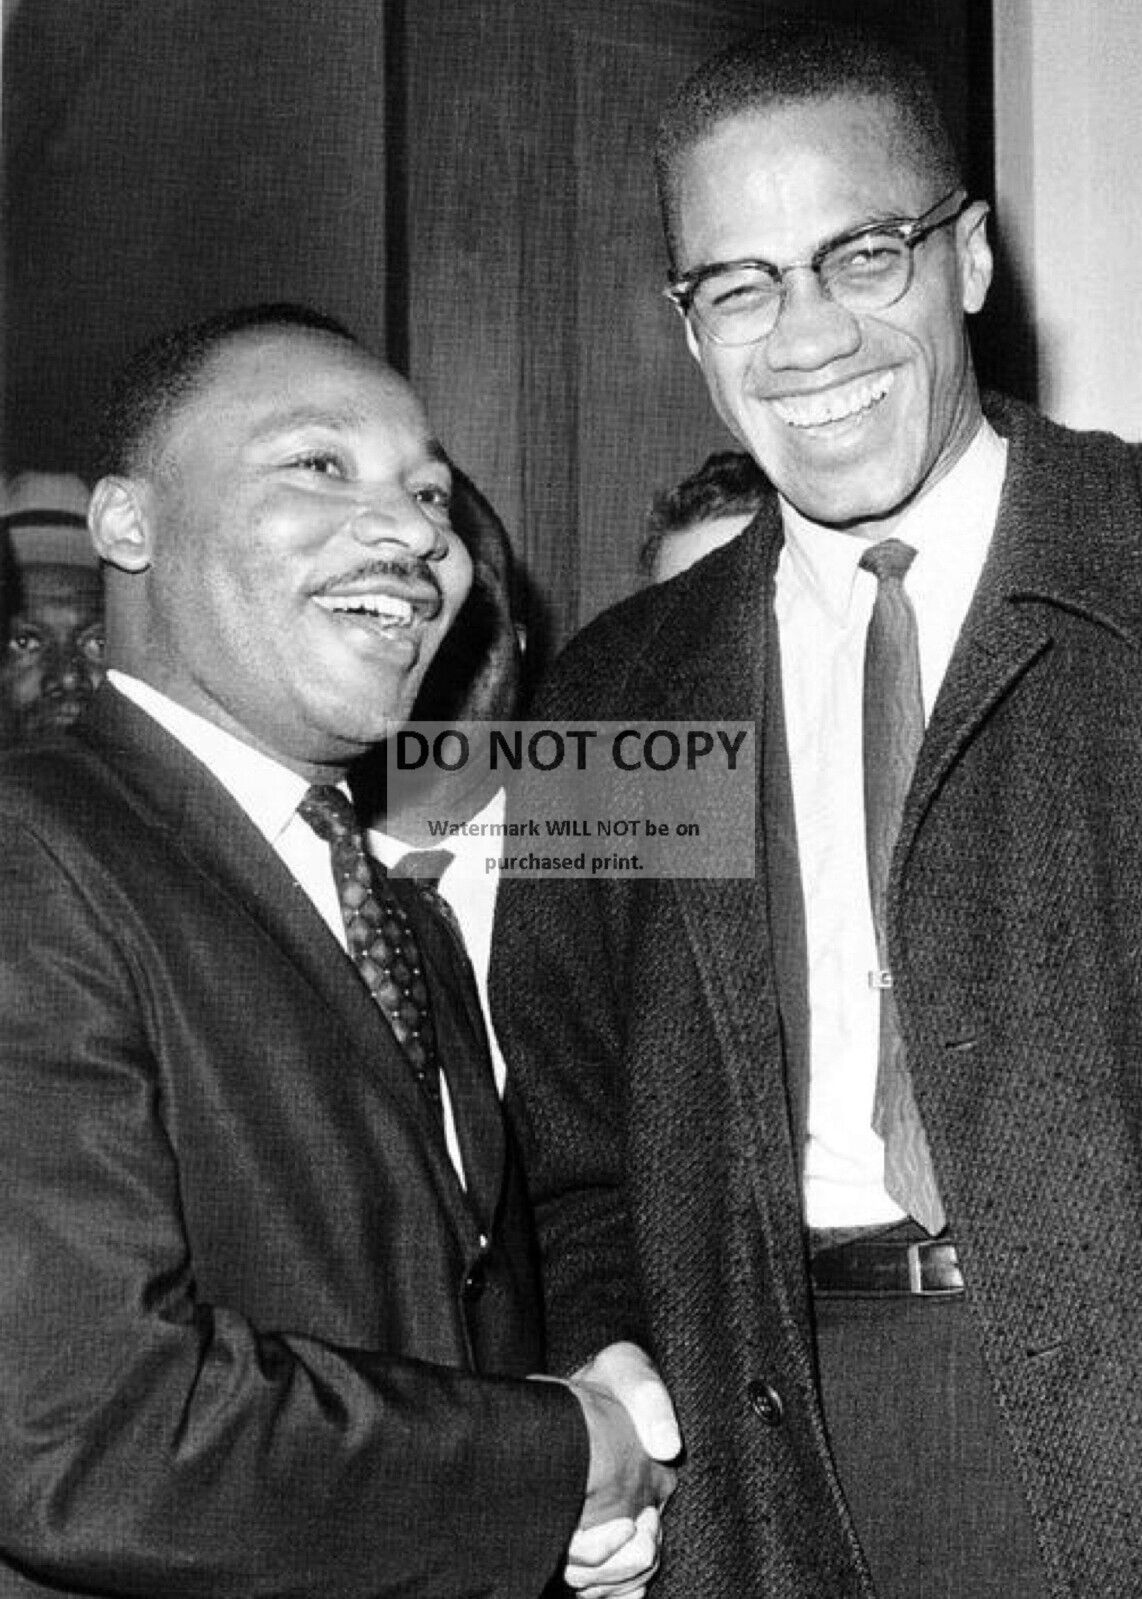 *5X7* PHOTO - MARTIN LUTHER KING, JR. AND MALCOLM X CIVIL RIGHTS ICONS (WW267)